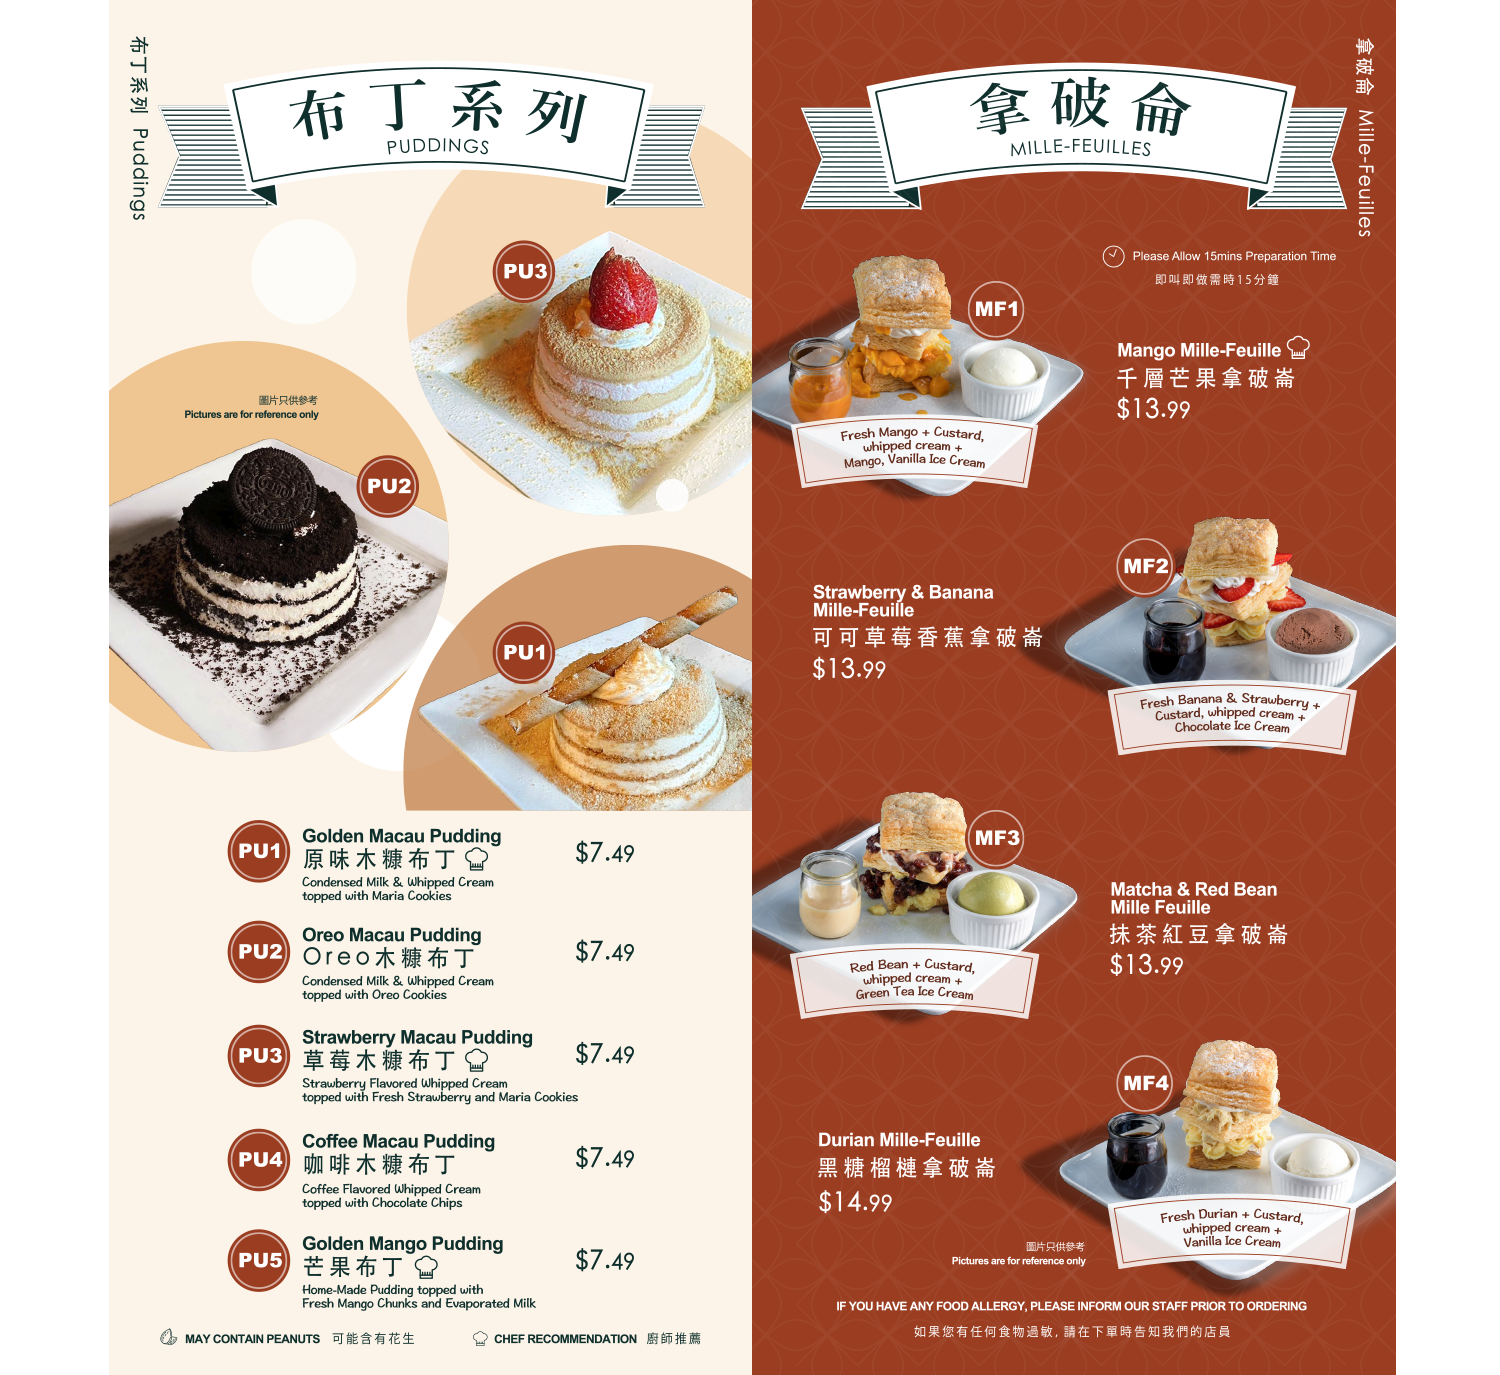 Menu Page Puddings and Mille-Feuilles